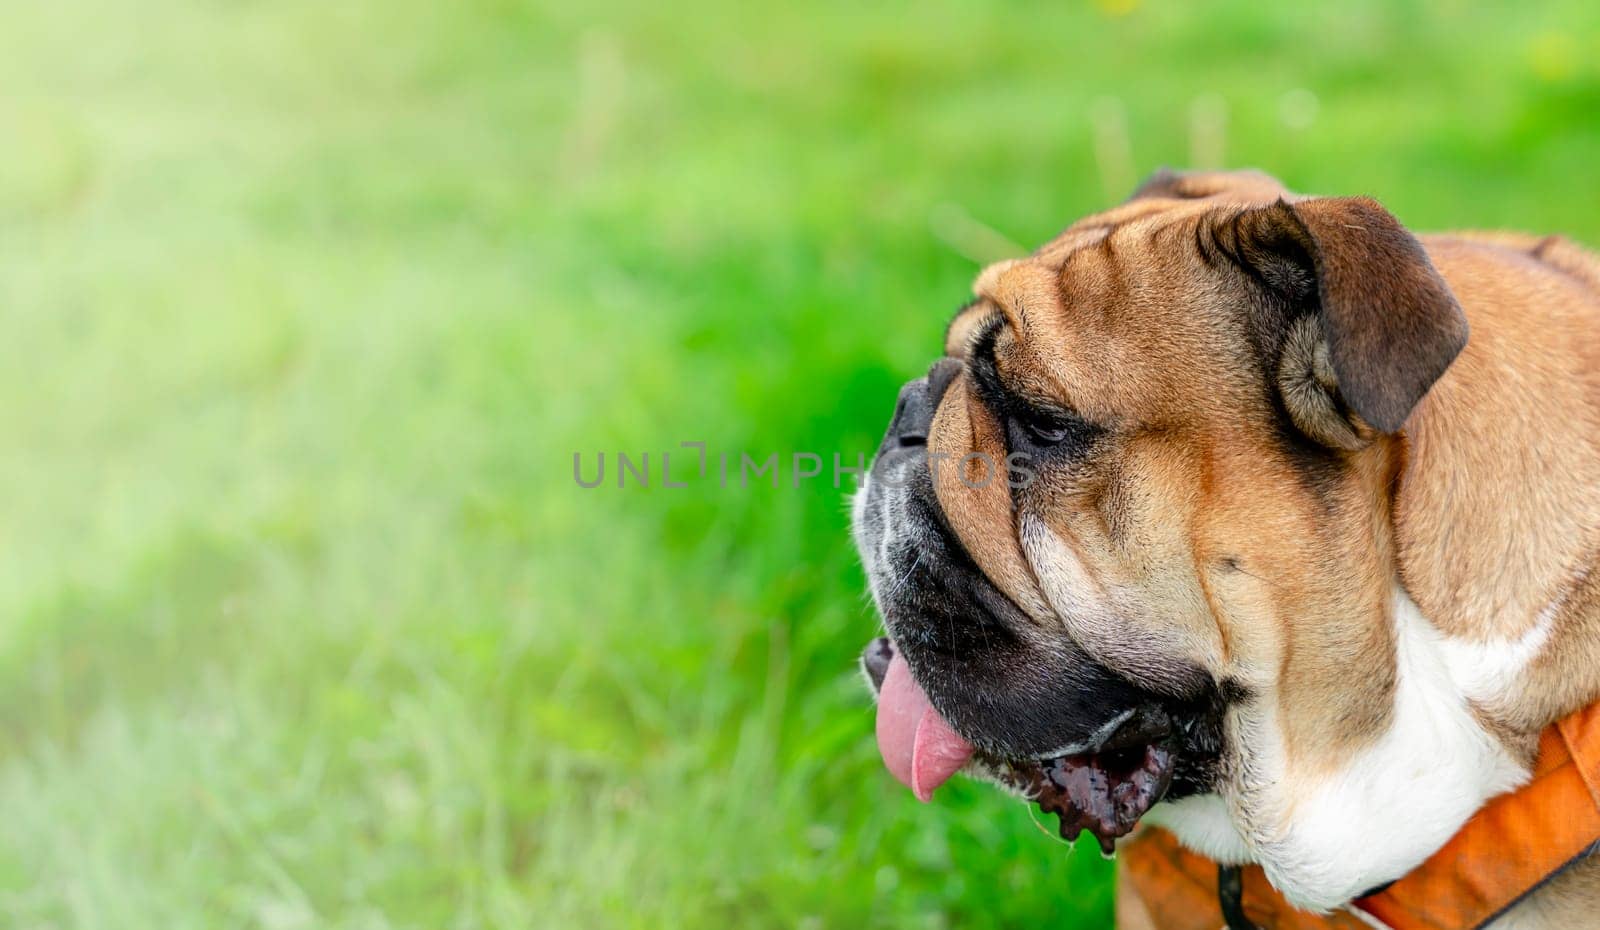 Funny beautiful classic Red English British Bulldog Dog out for a walk looking up sitting in the grass in forest on sunny day at sunset